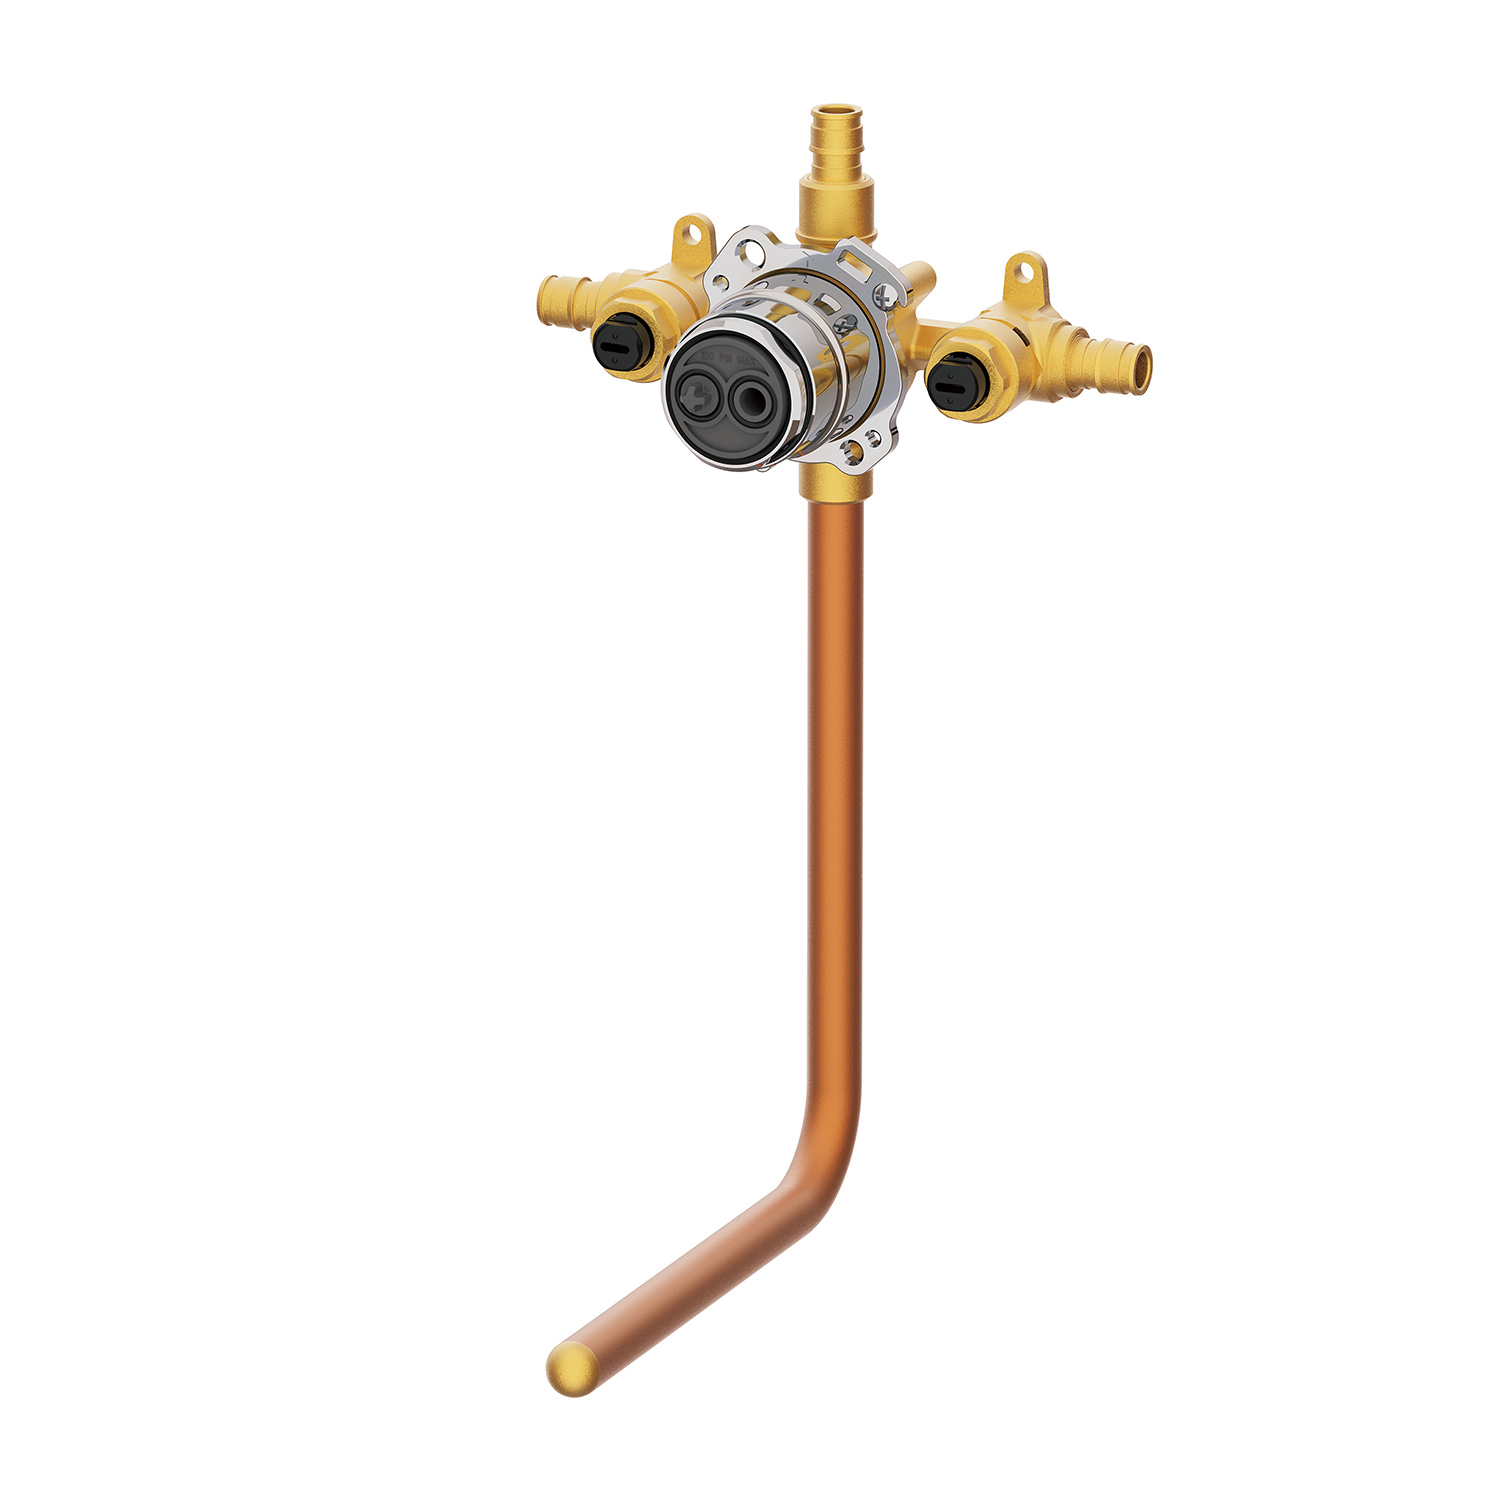 Danze G00GS507ST Treysta Tub & Shower Valve- Horizontal Inputs WITH Stops WITH Stub-out - Cold Expansion Pex